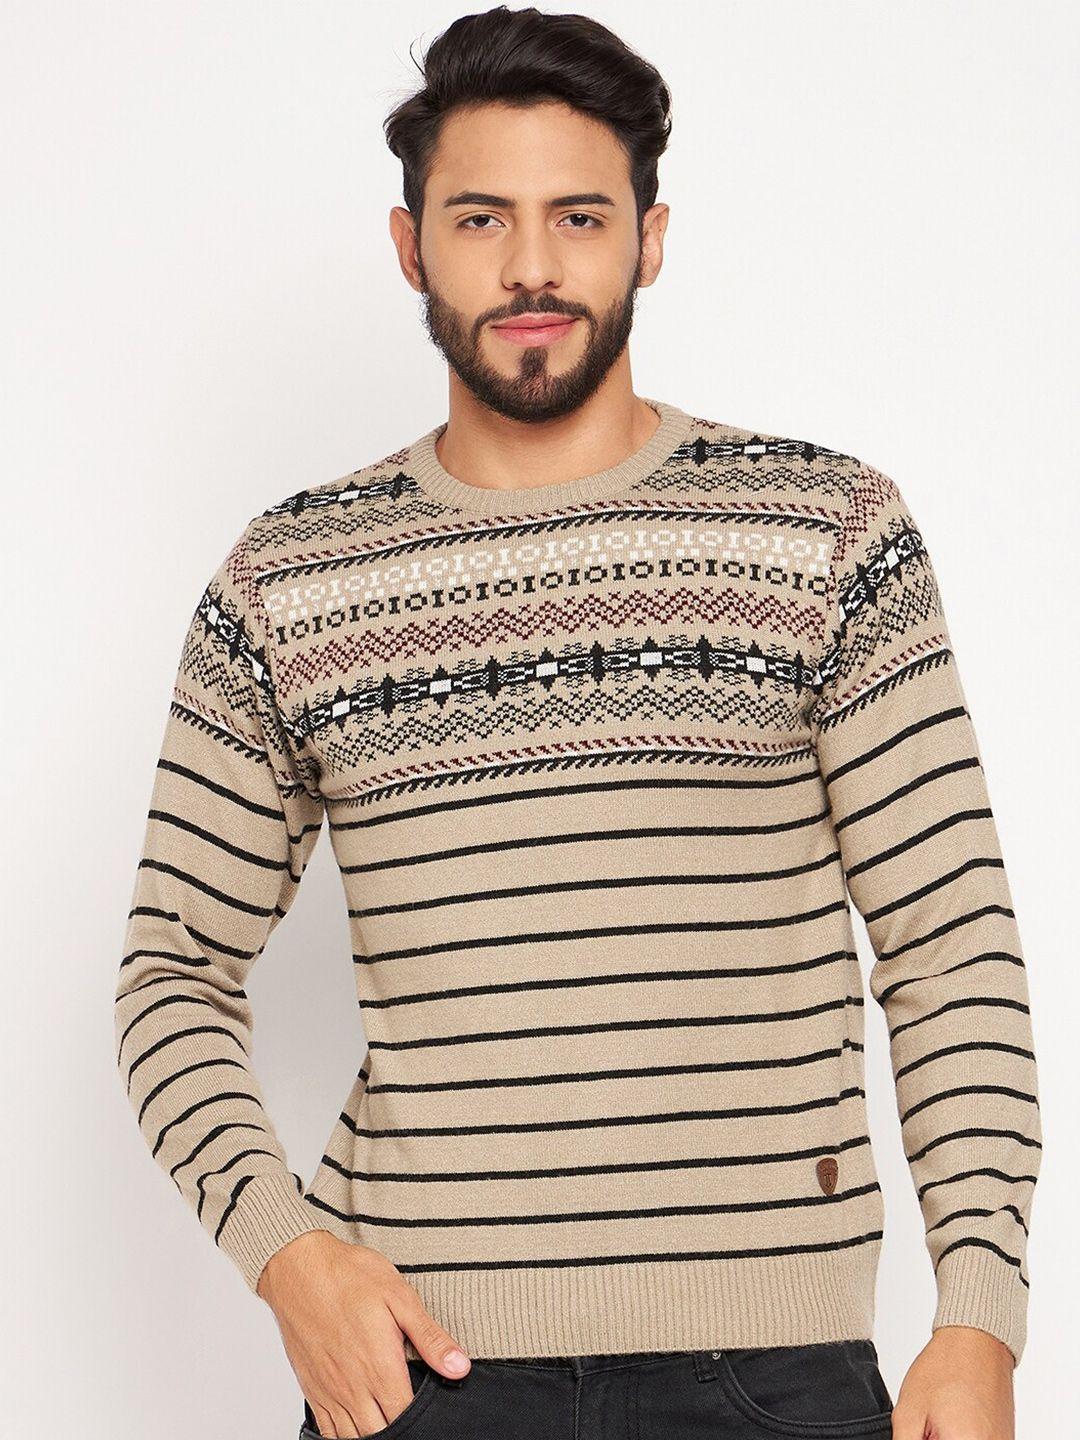 duke-striped-round-neck-ribbed-pullover-sweaters